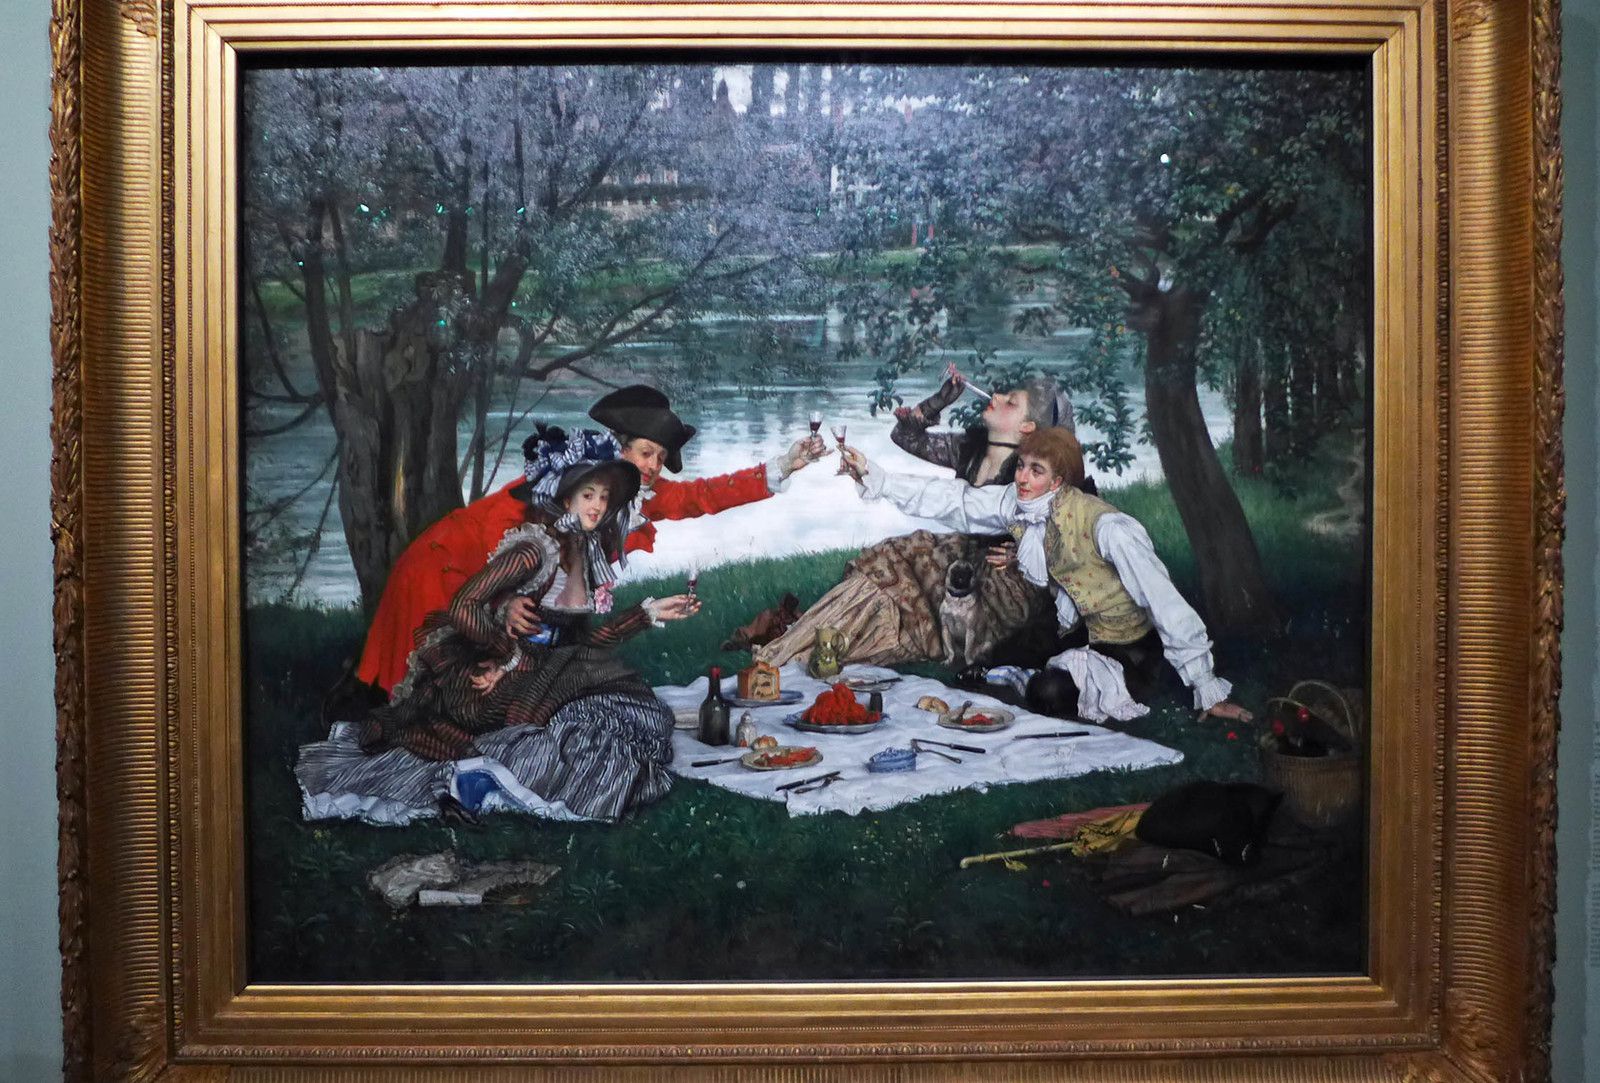 James Tissot, Partie carrée (1870), huile sur toile. Ottawa, National Gallery of Canada.